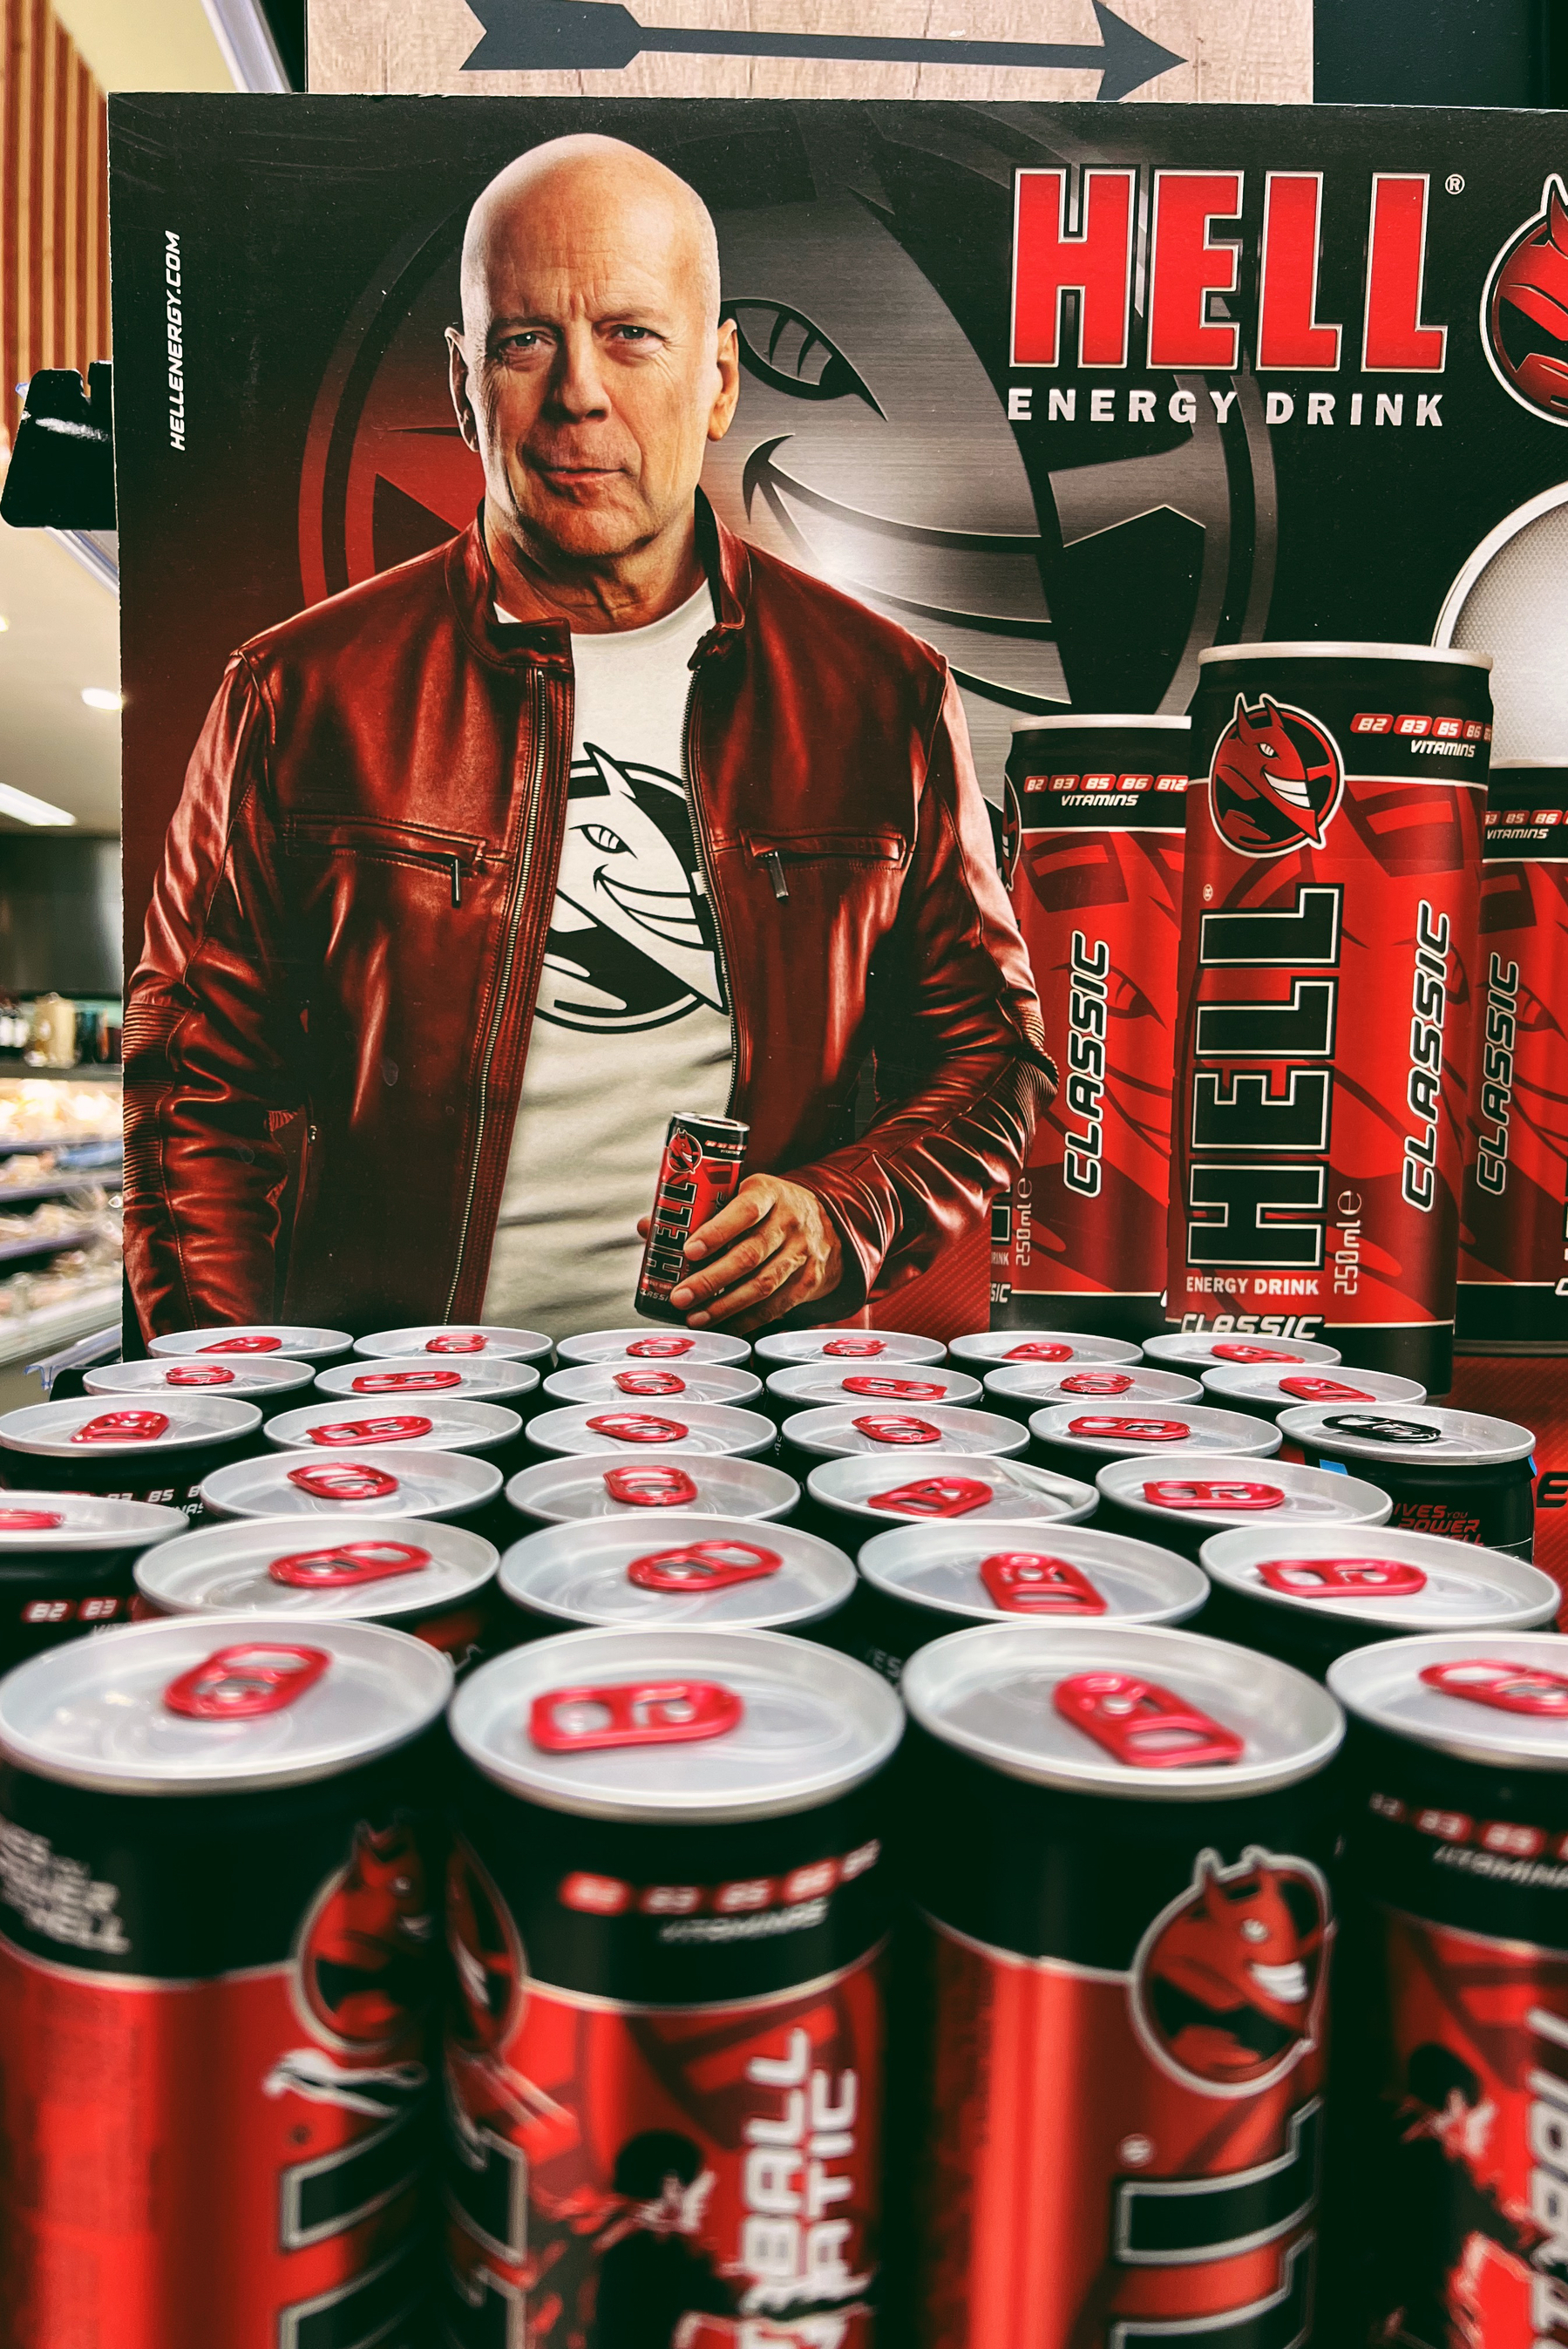 Bruce Willis advertising HELL, an energy drink. 